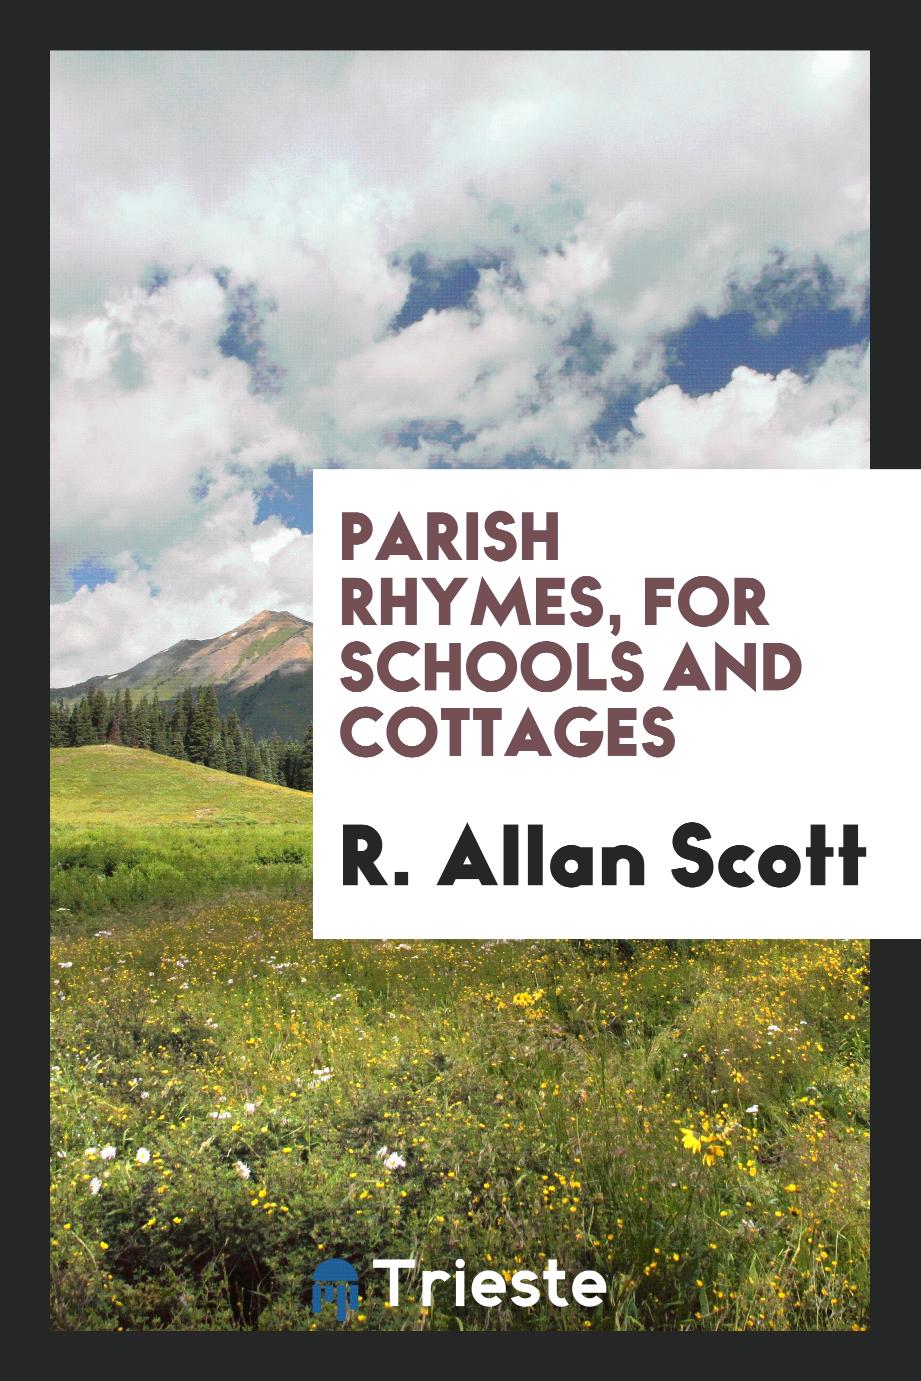 Parish rhymes, for schools and cottages